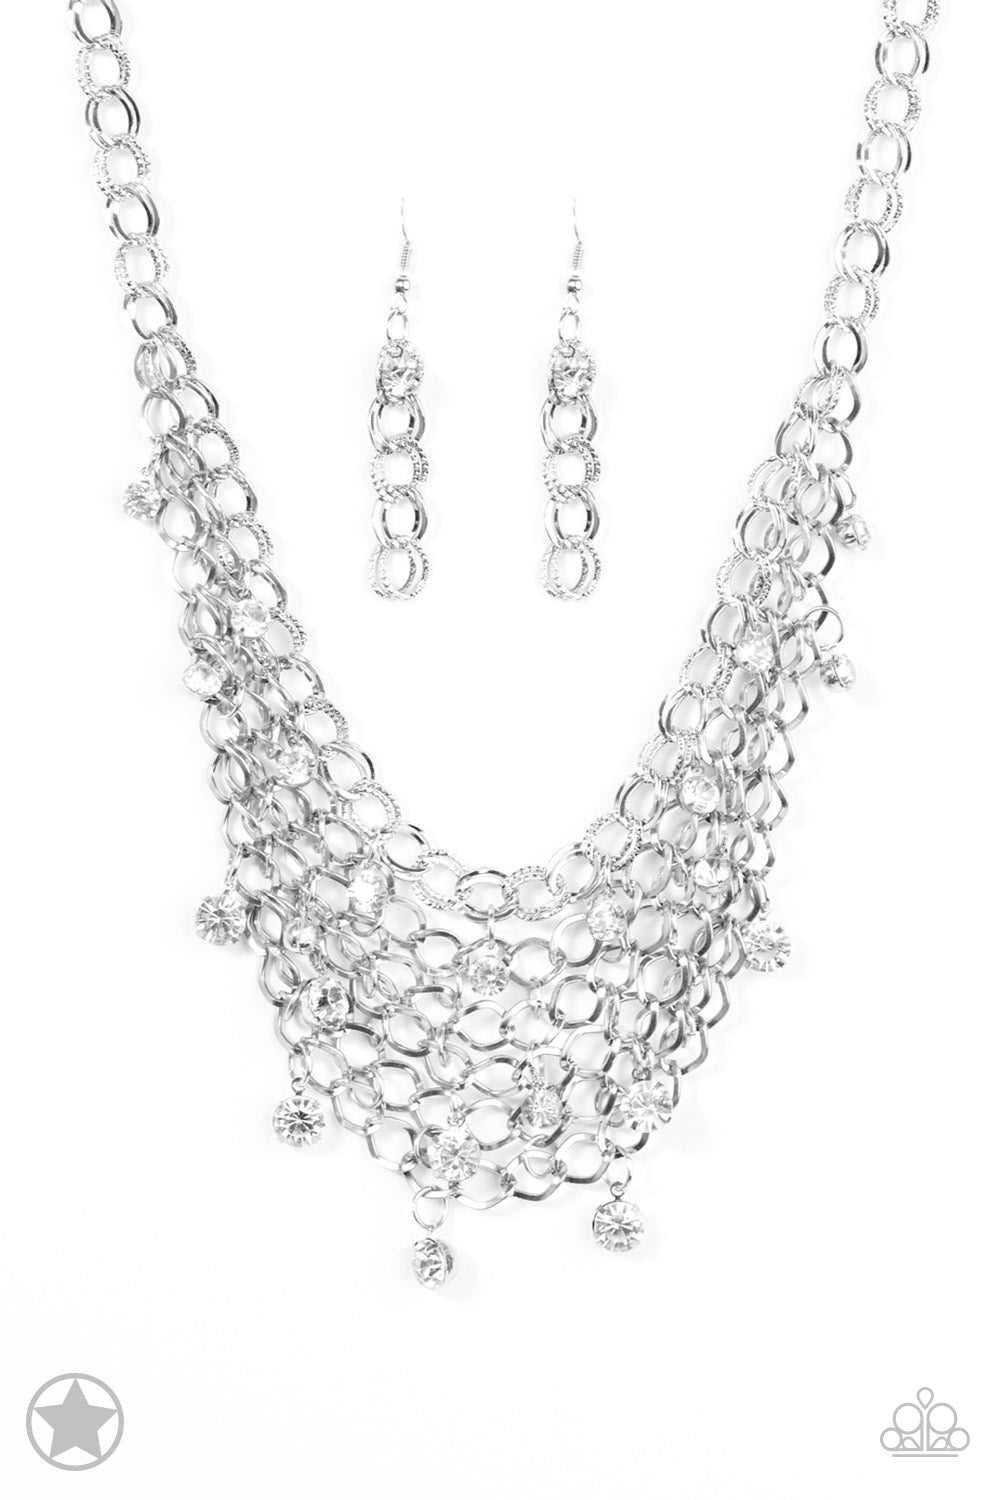 Paparazzi Accessories - Fishing for Compliments - Silver Necklace